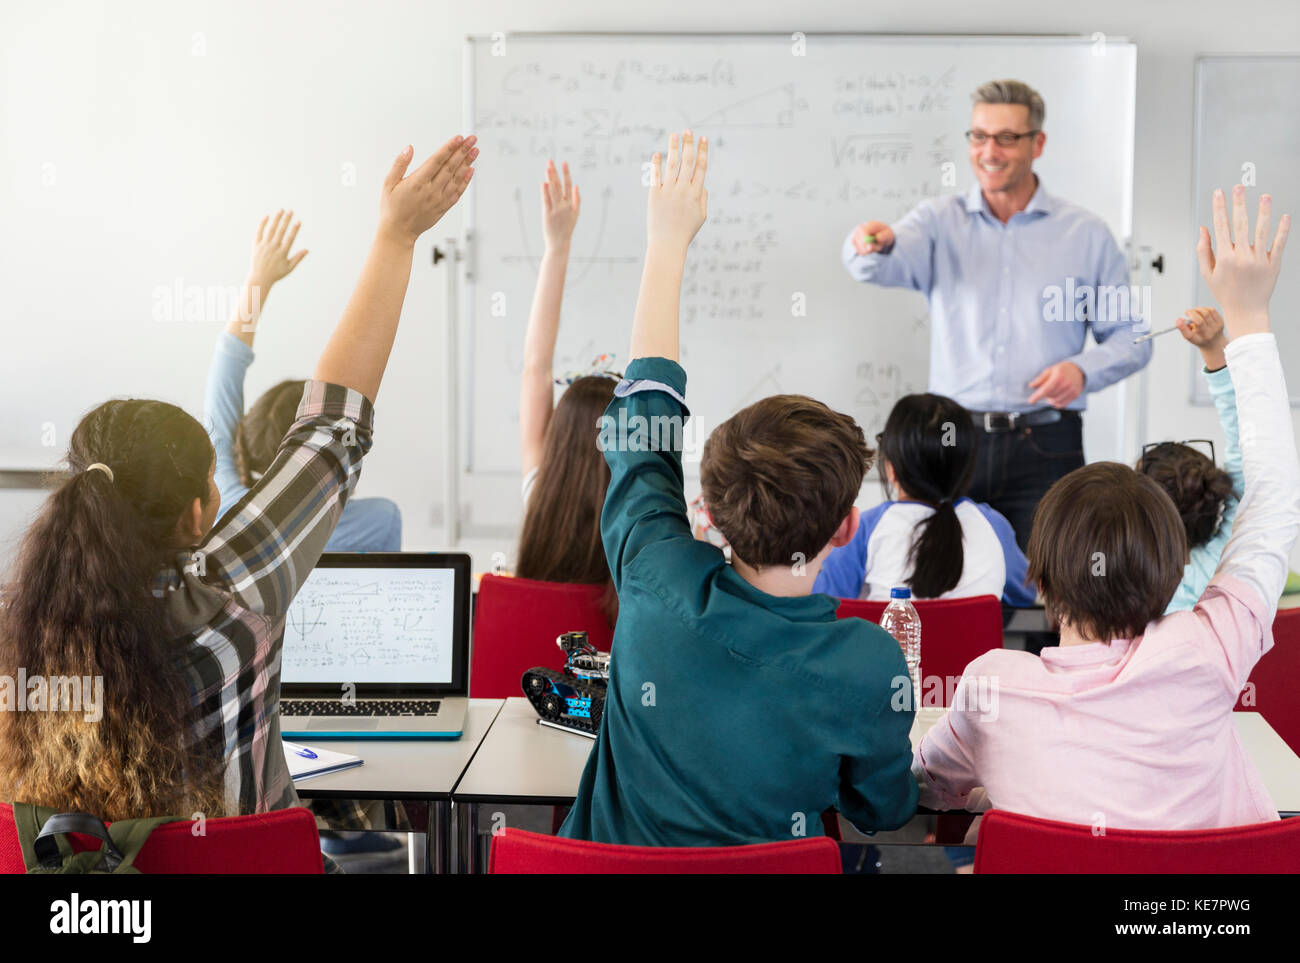 Male teacher calling on students in classroom Stock Photo